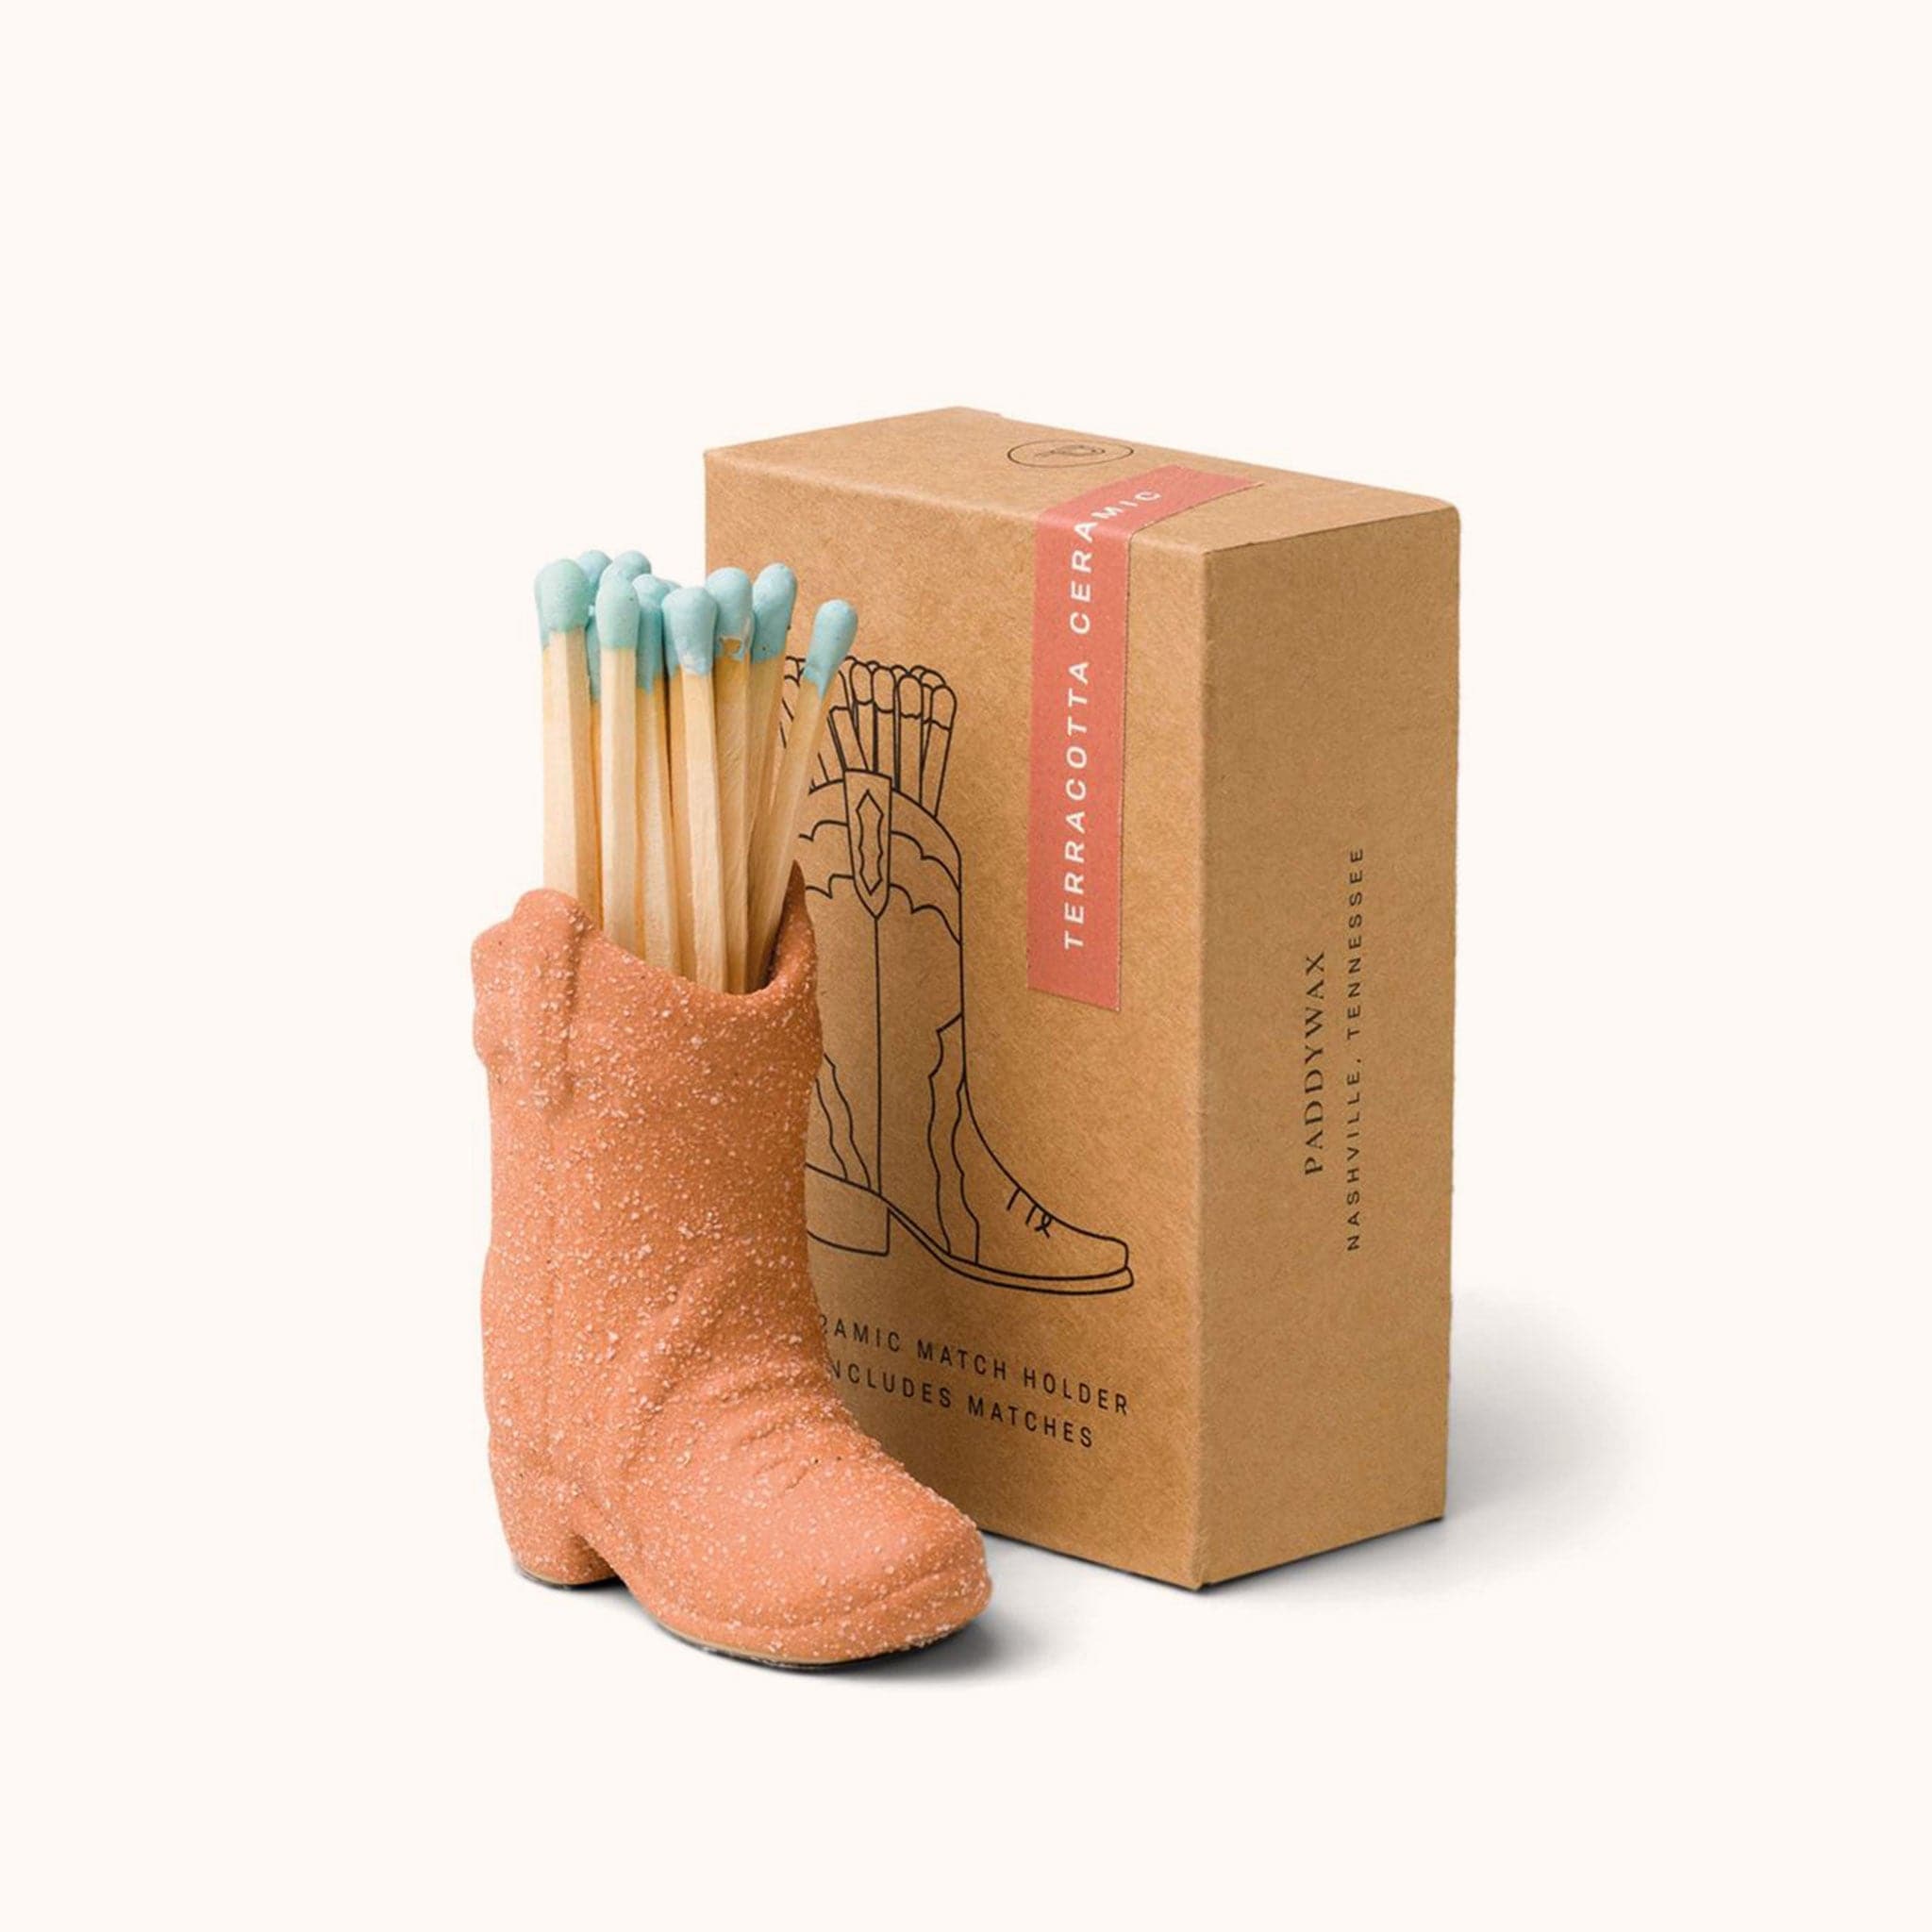 Terracotta ceramic boot match holder filled with a bundle of blue dipped matches. The holder is positioned next to kraft brown packaging.